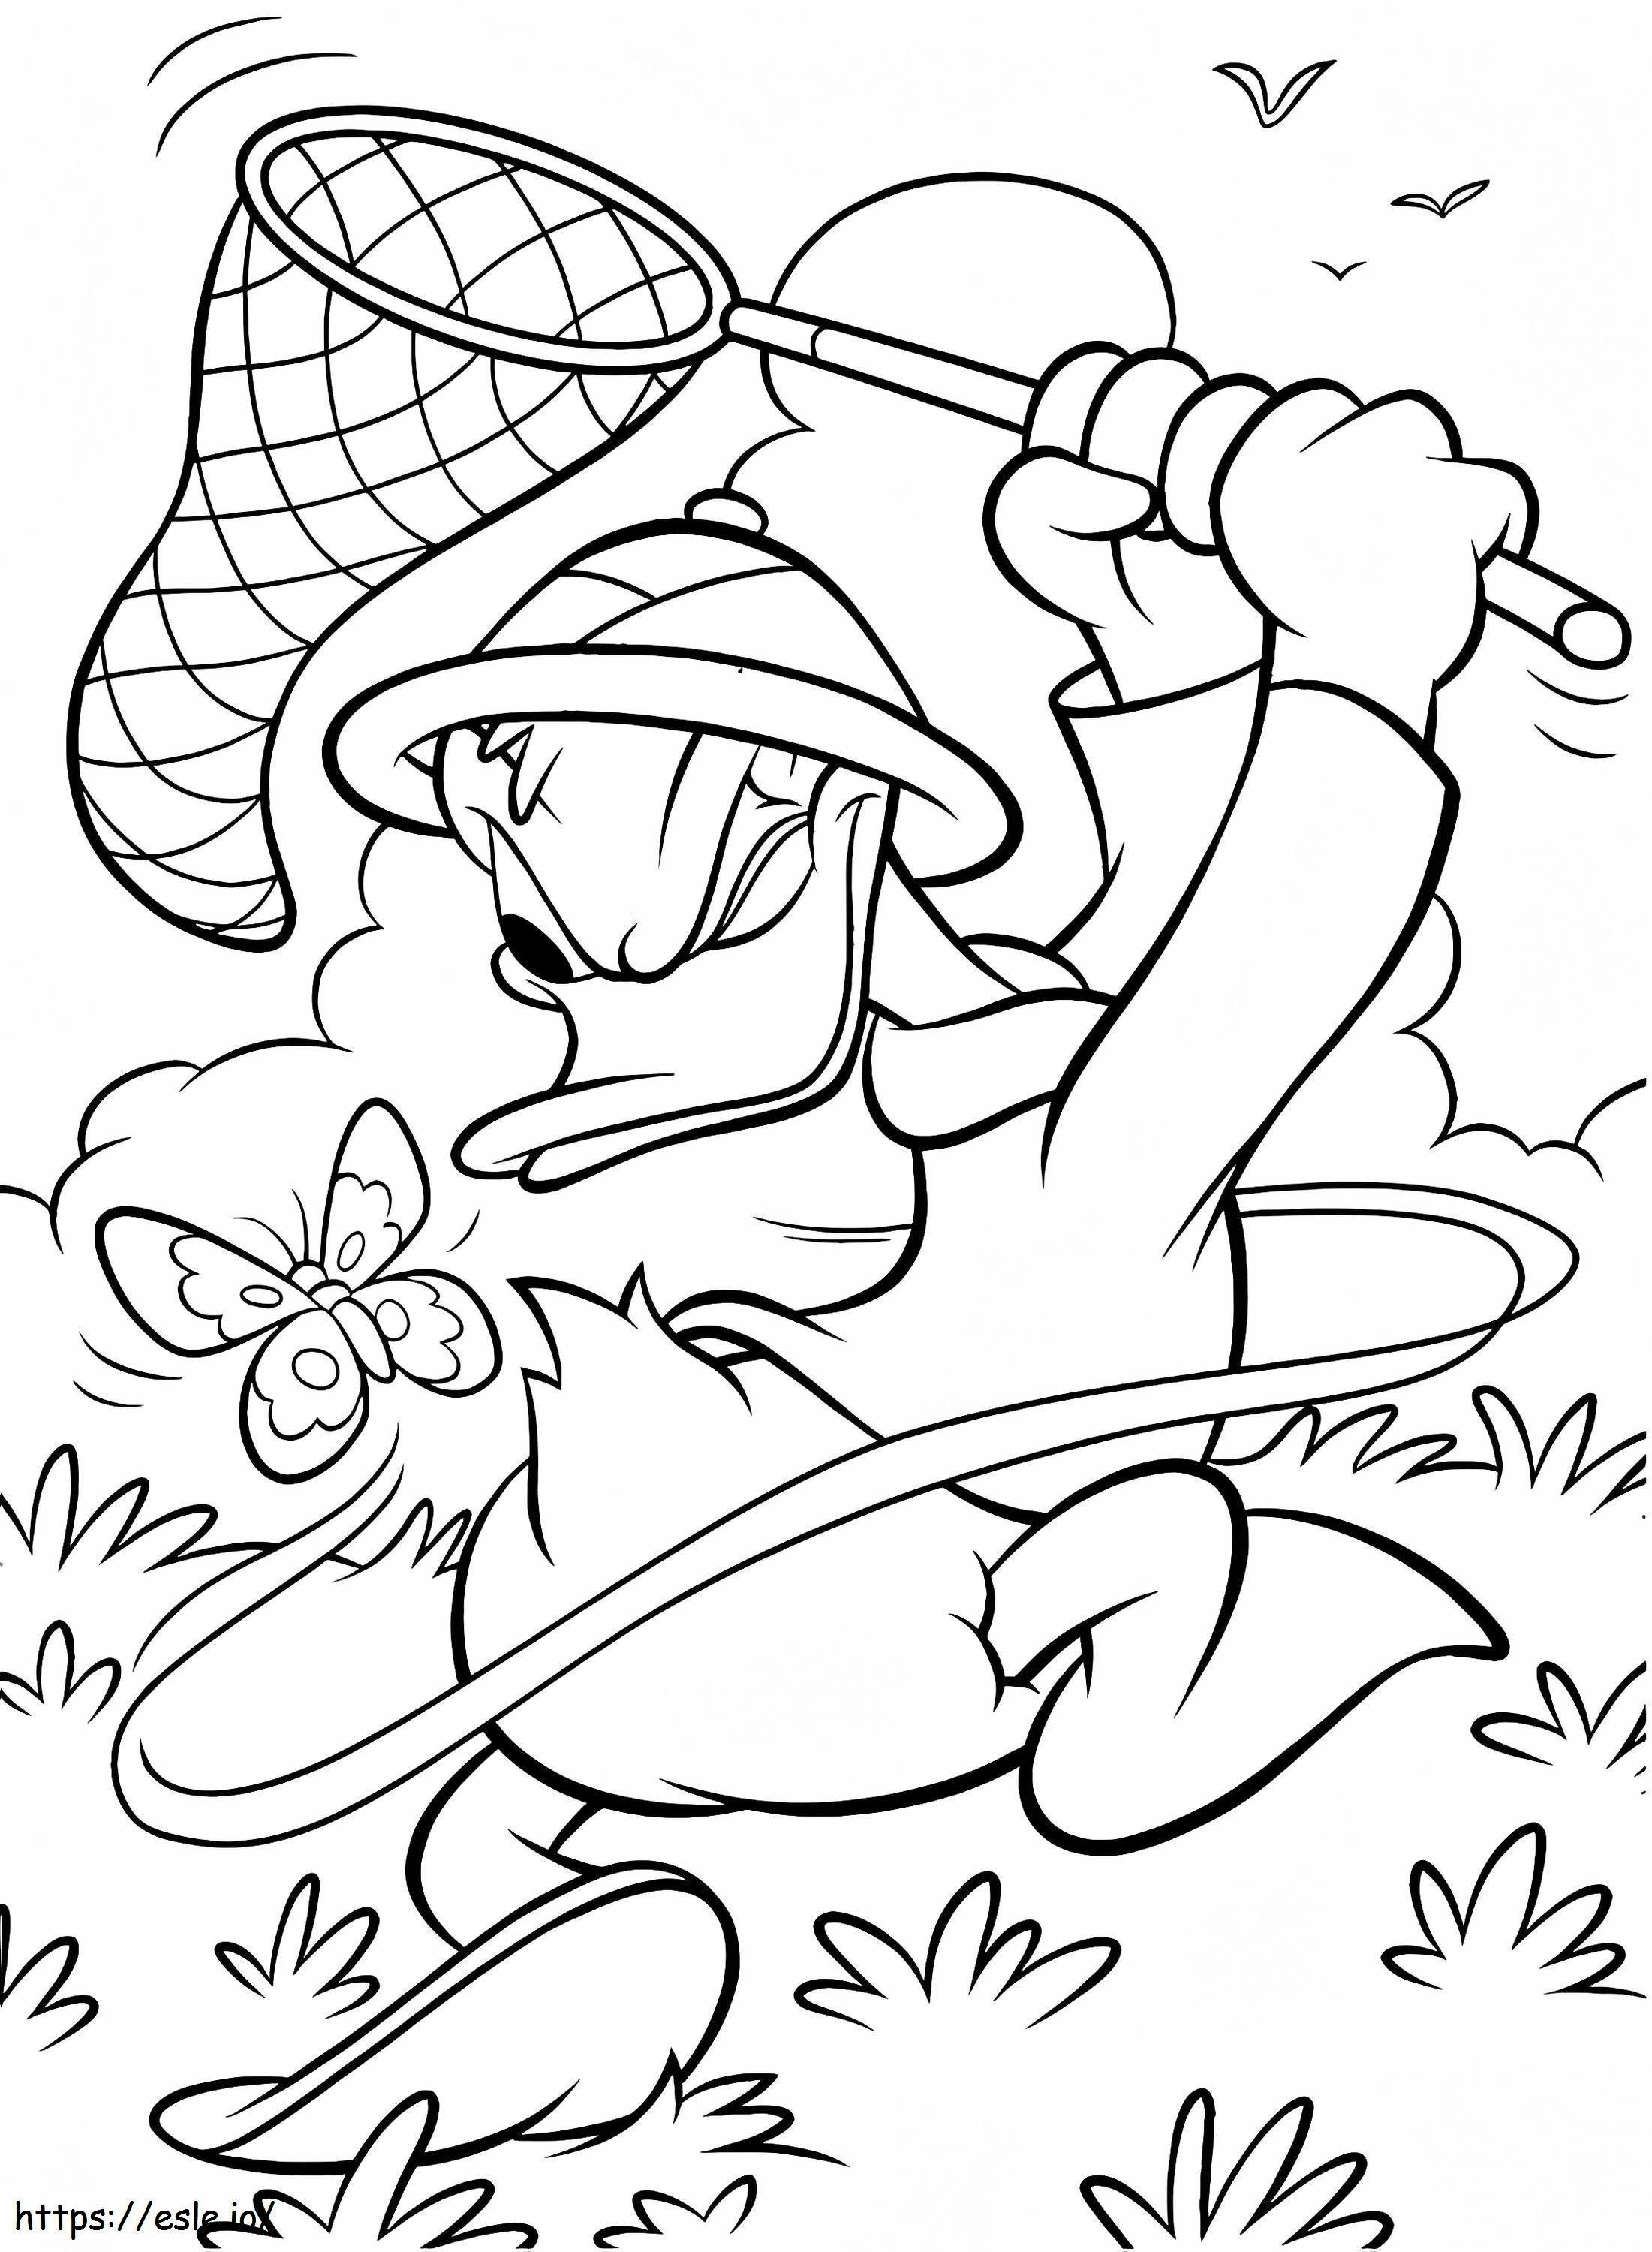 1534755644 Donald Catching Butterfly A4 coloring page